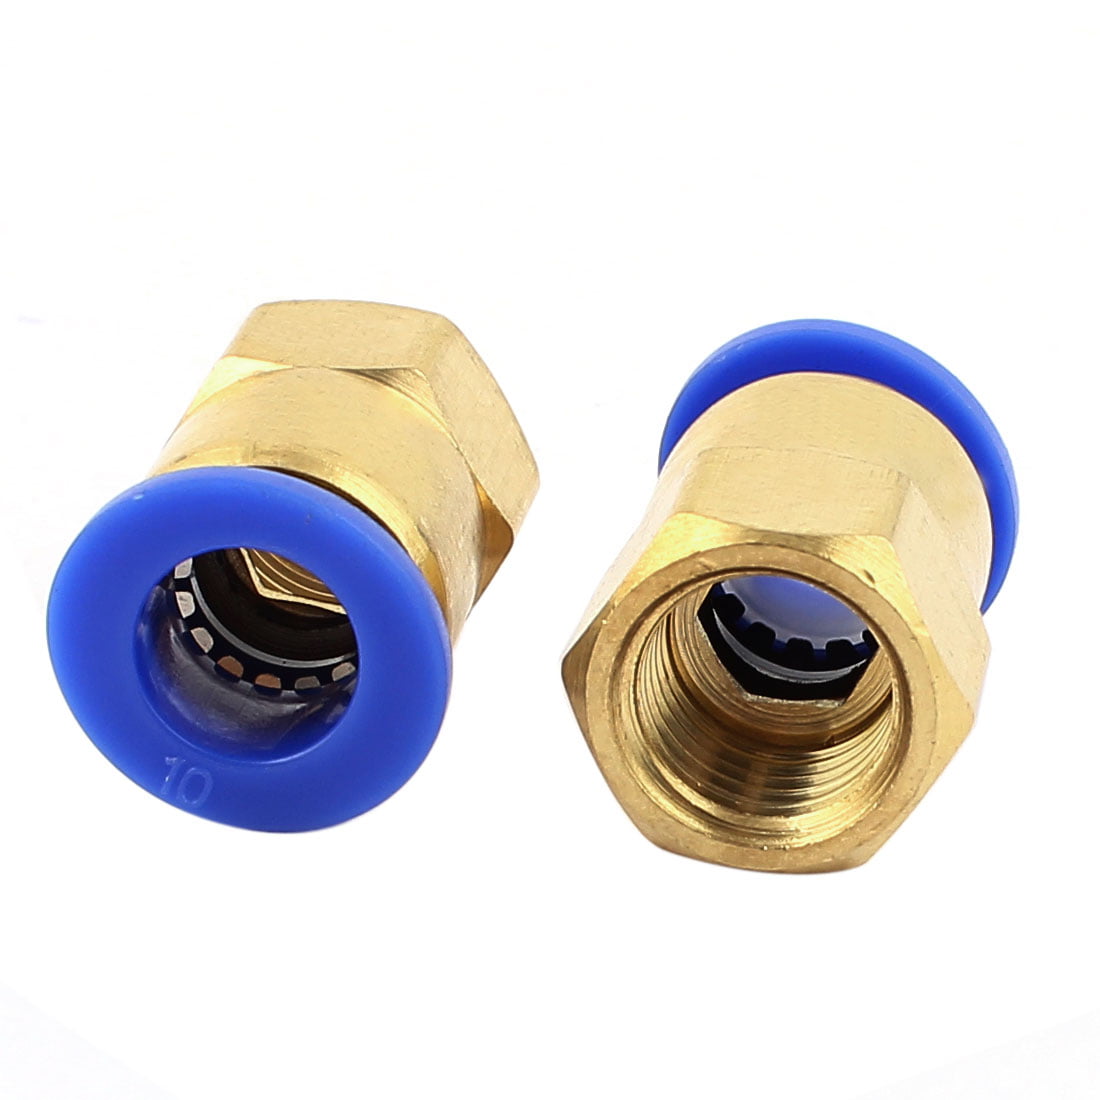 2pcs 1/4 BSP Thread to 10mm Push in Pneumatic Air Quick Connect Tube Fitting